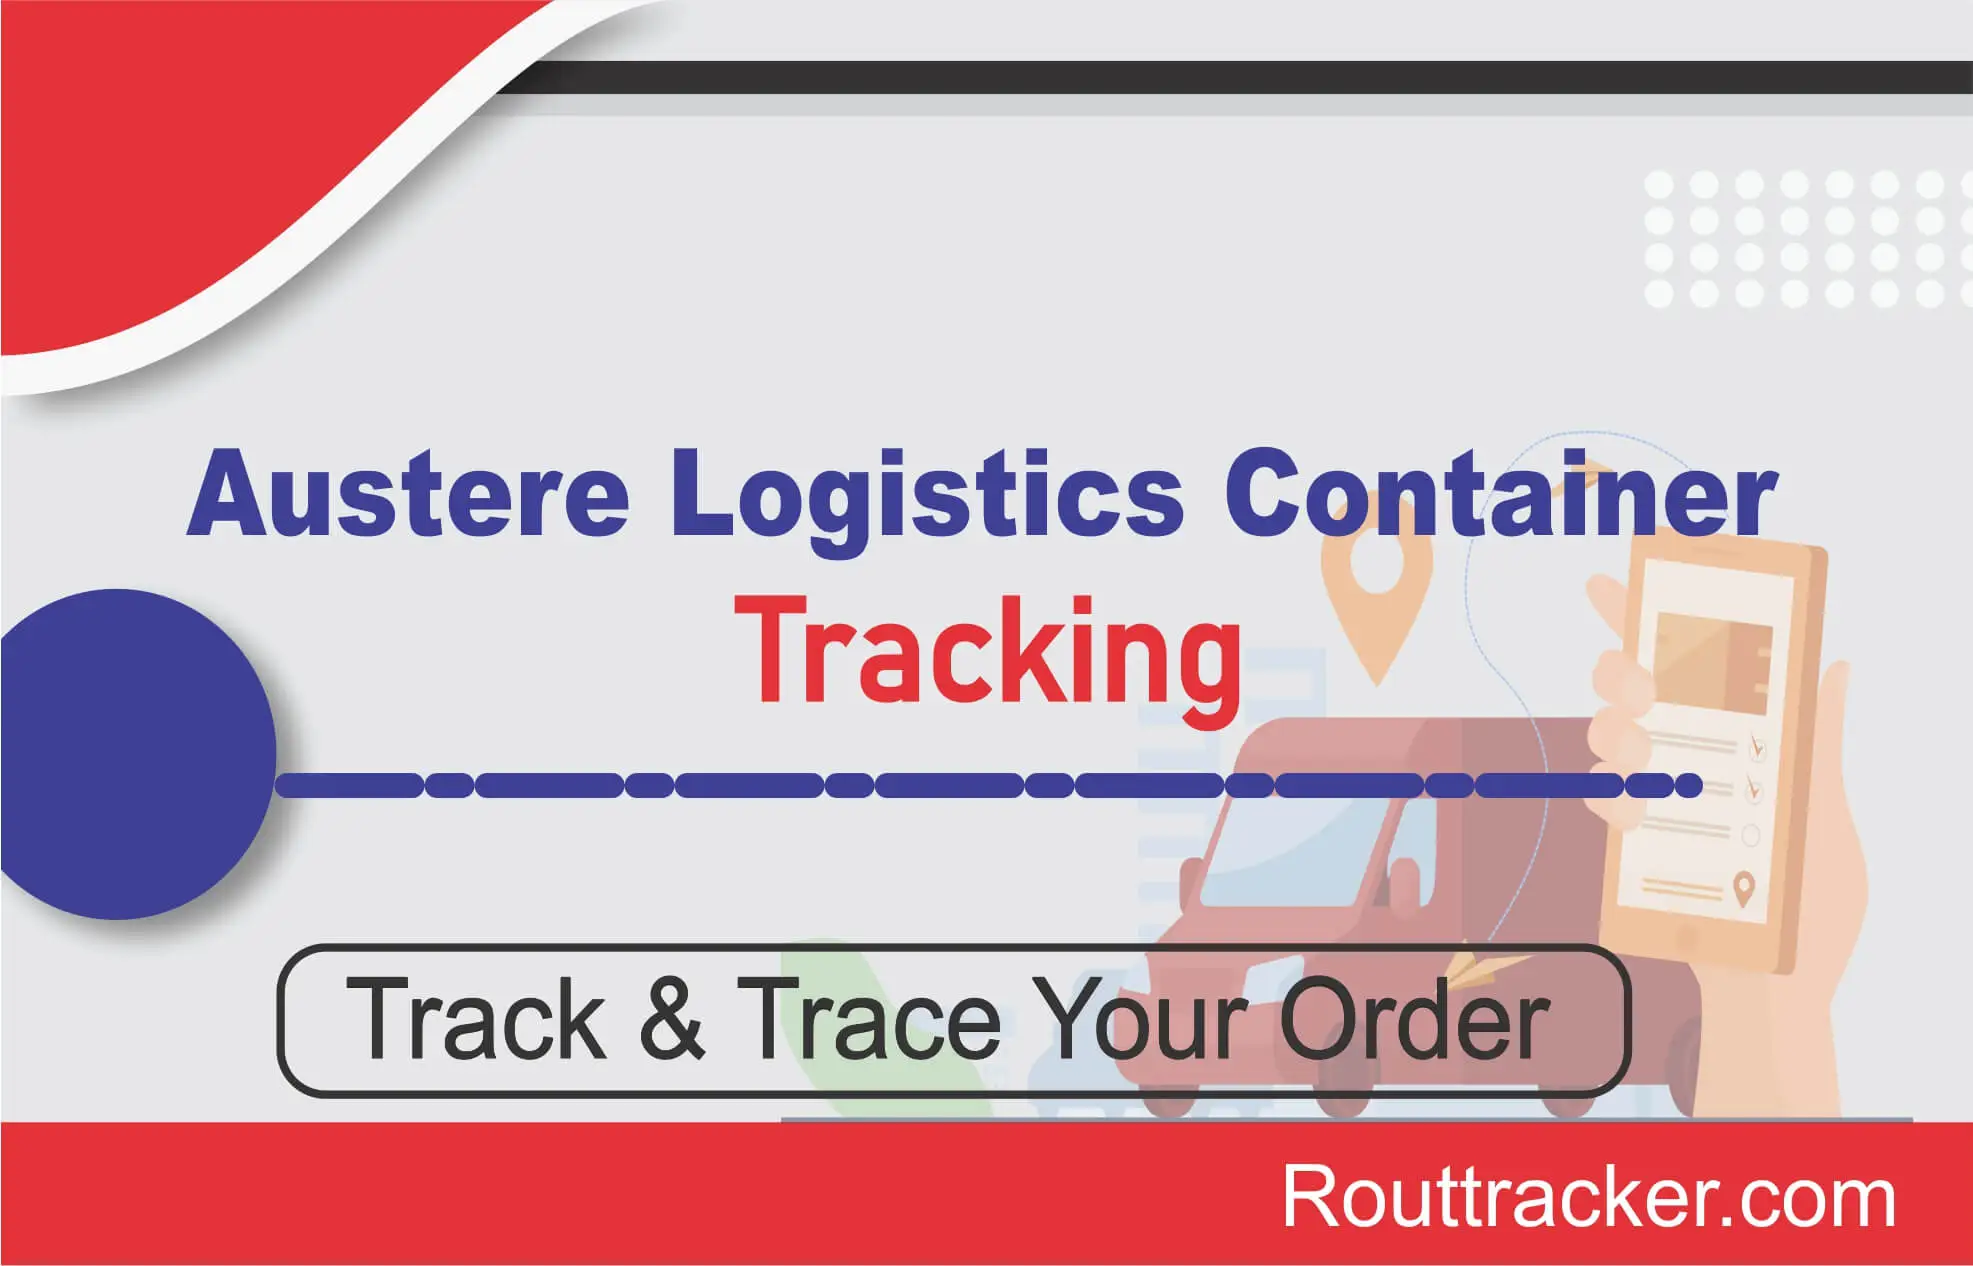 Austere Logistics Container Tracking